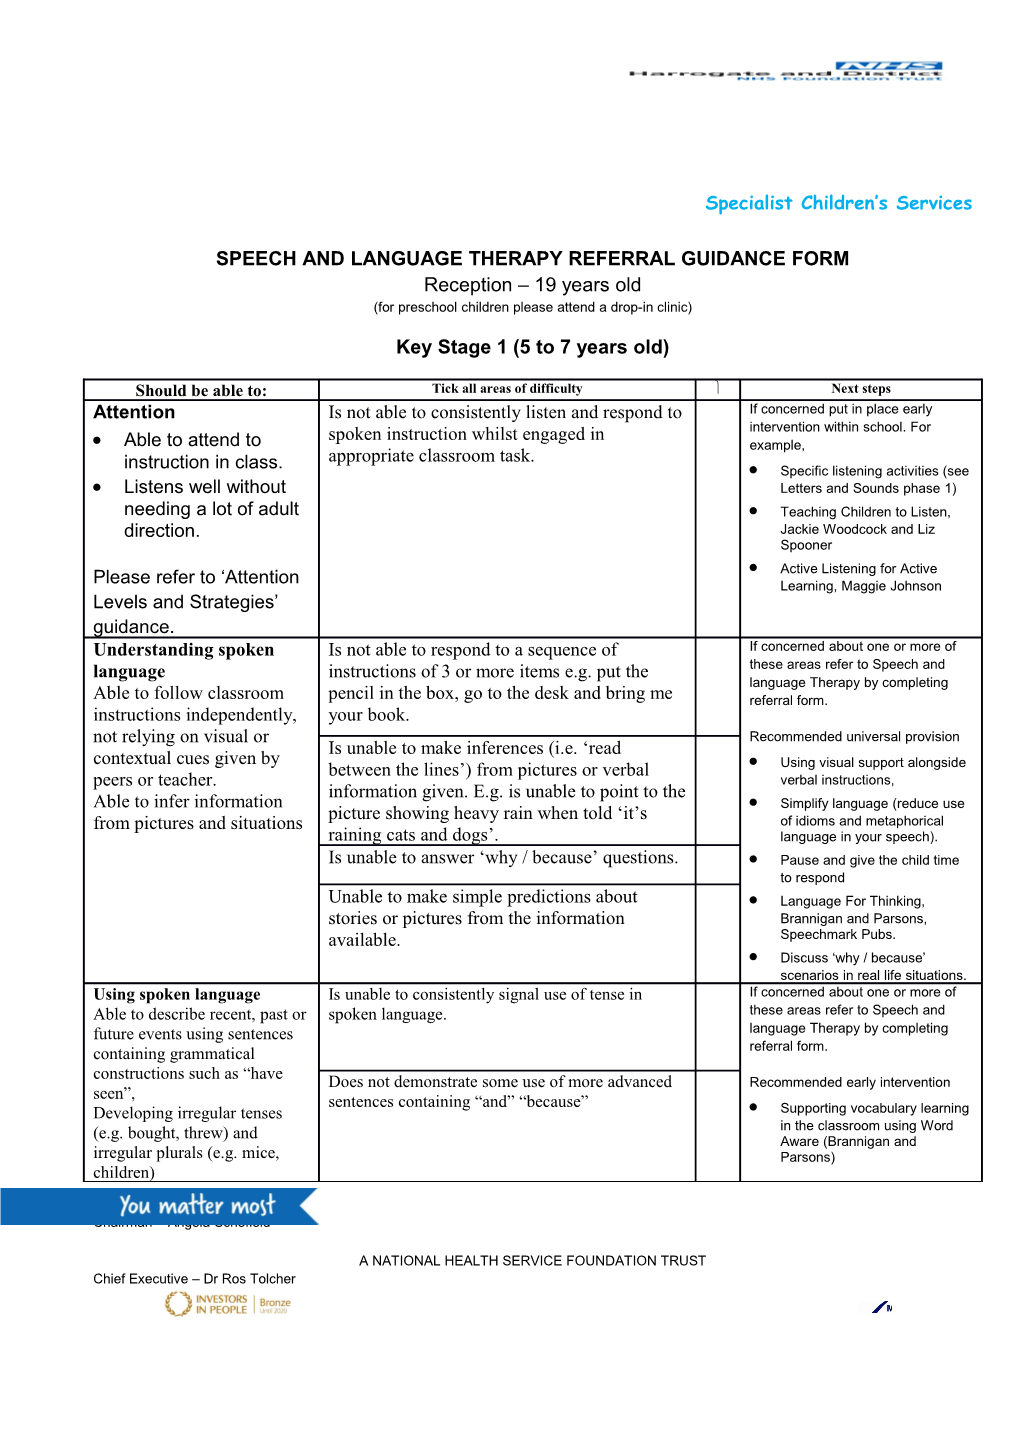 Speech and Language Therapy Referral Guidance Form